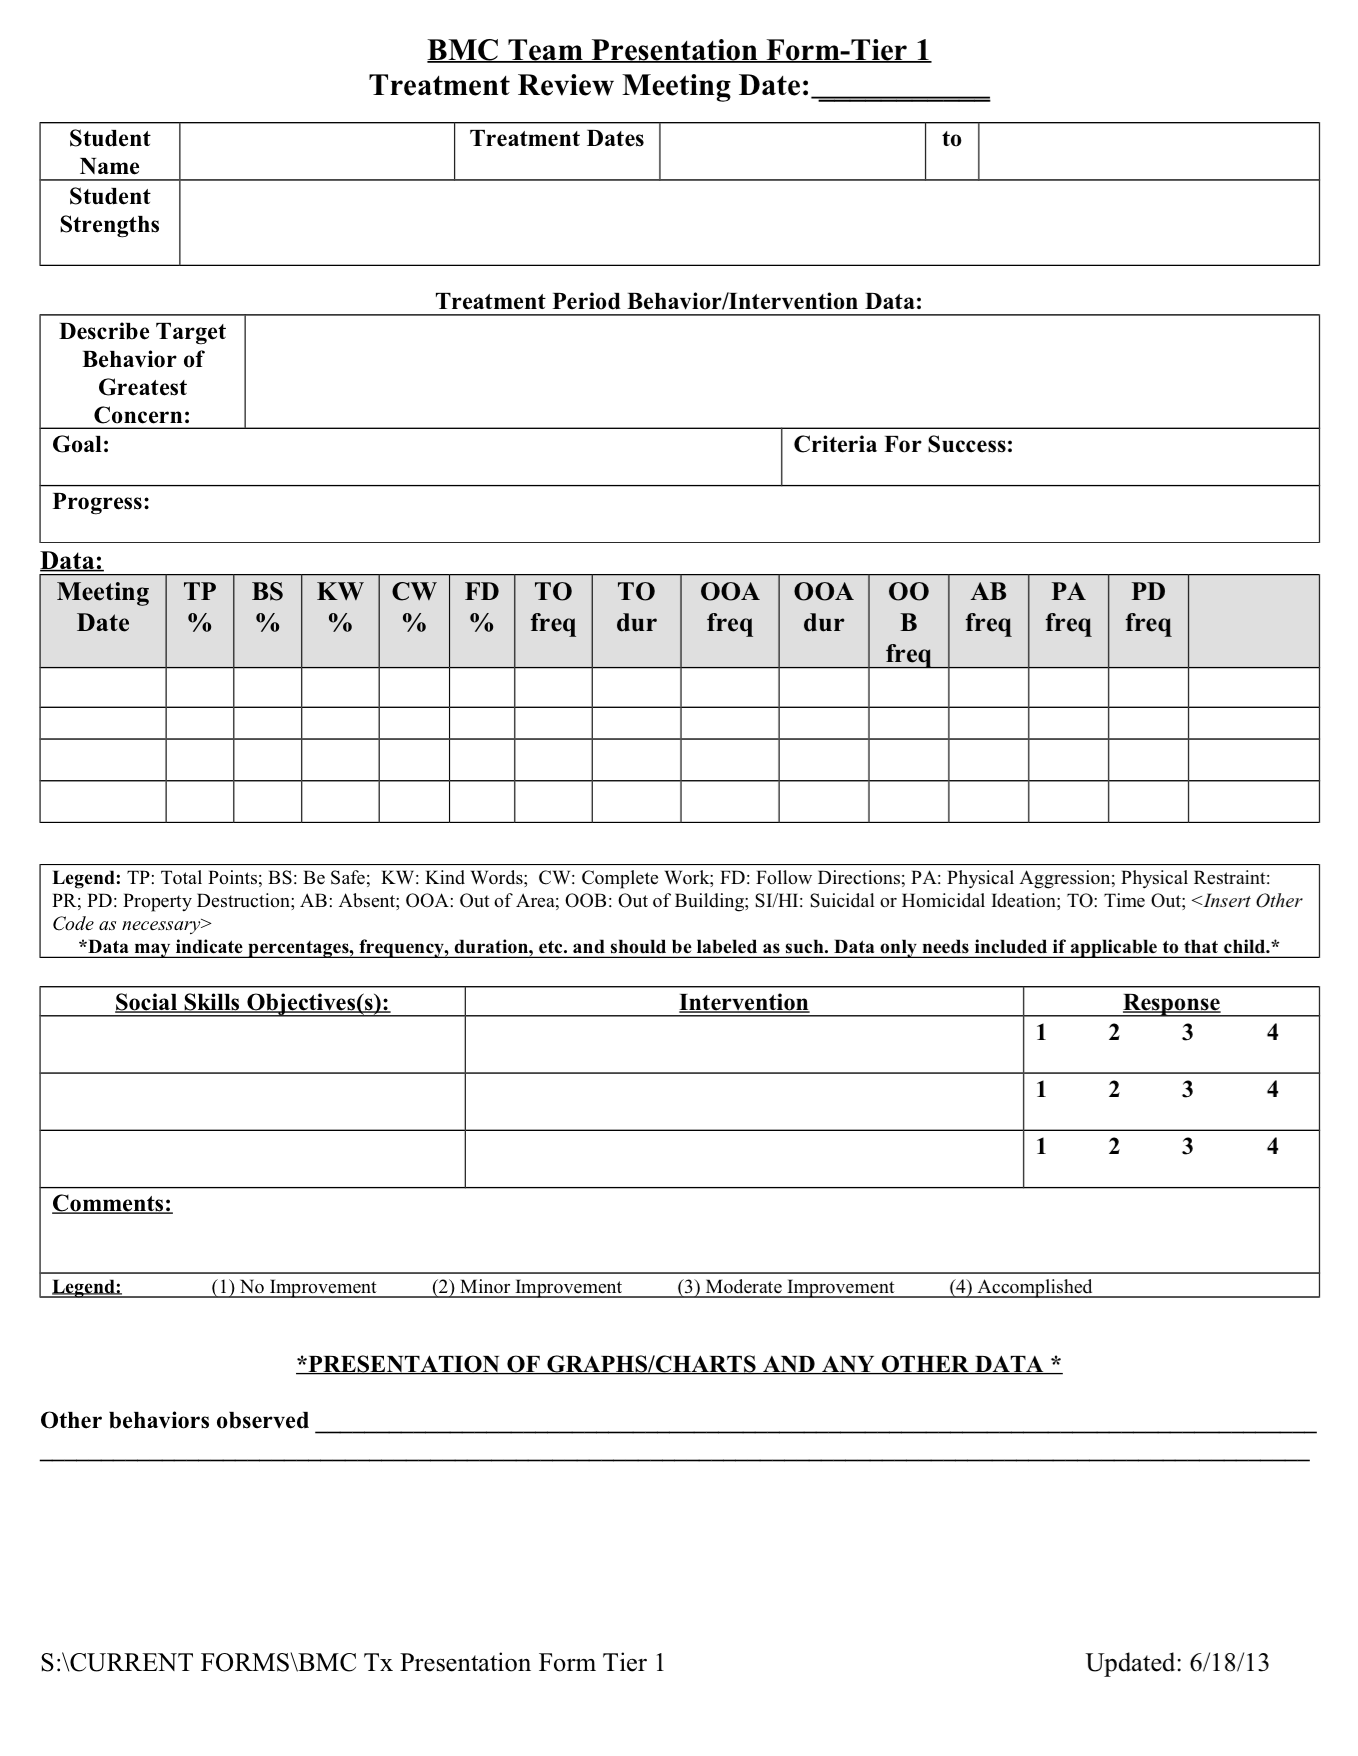 Existing form teachers use to record data